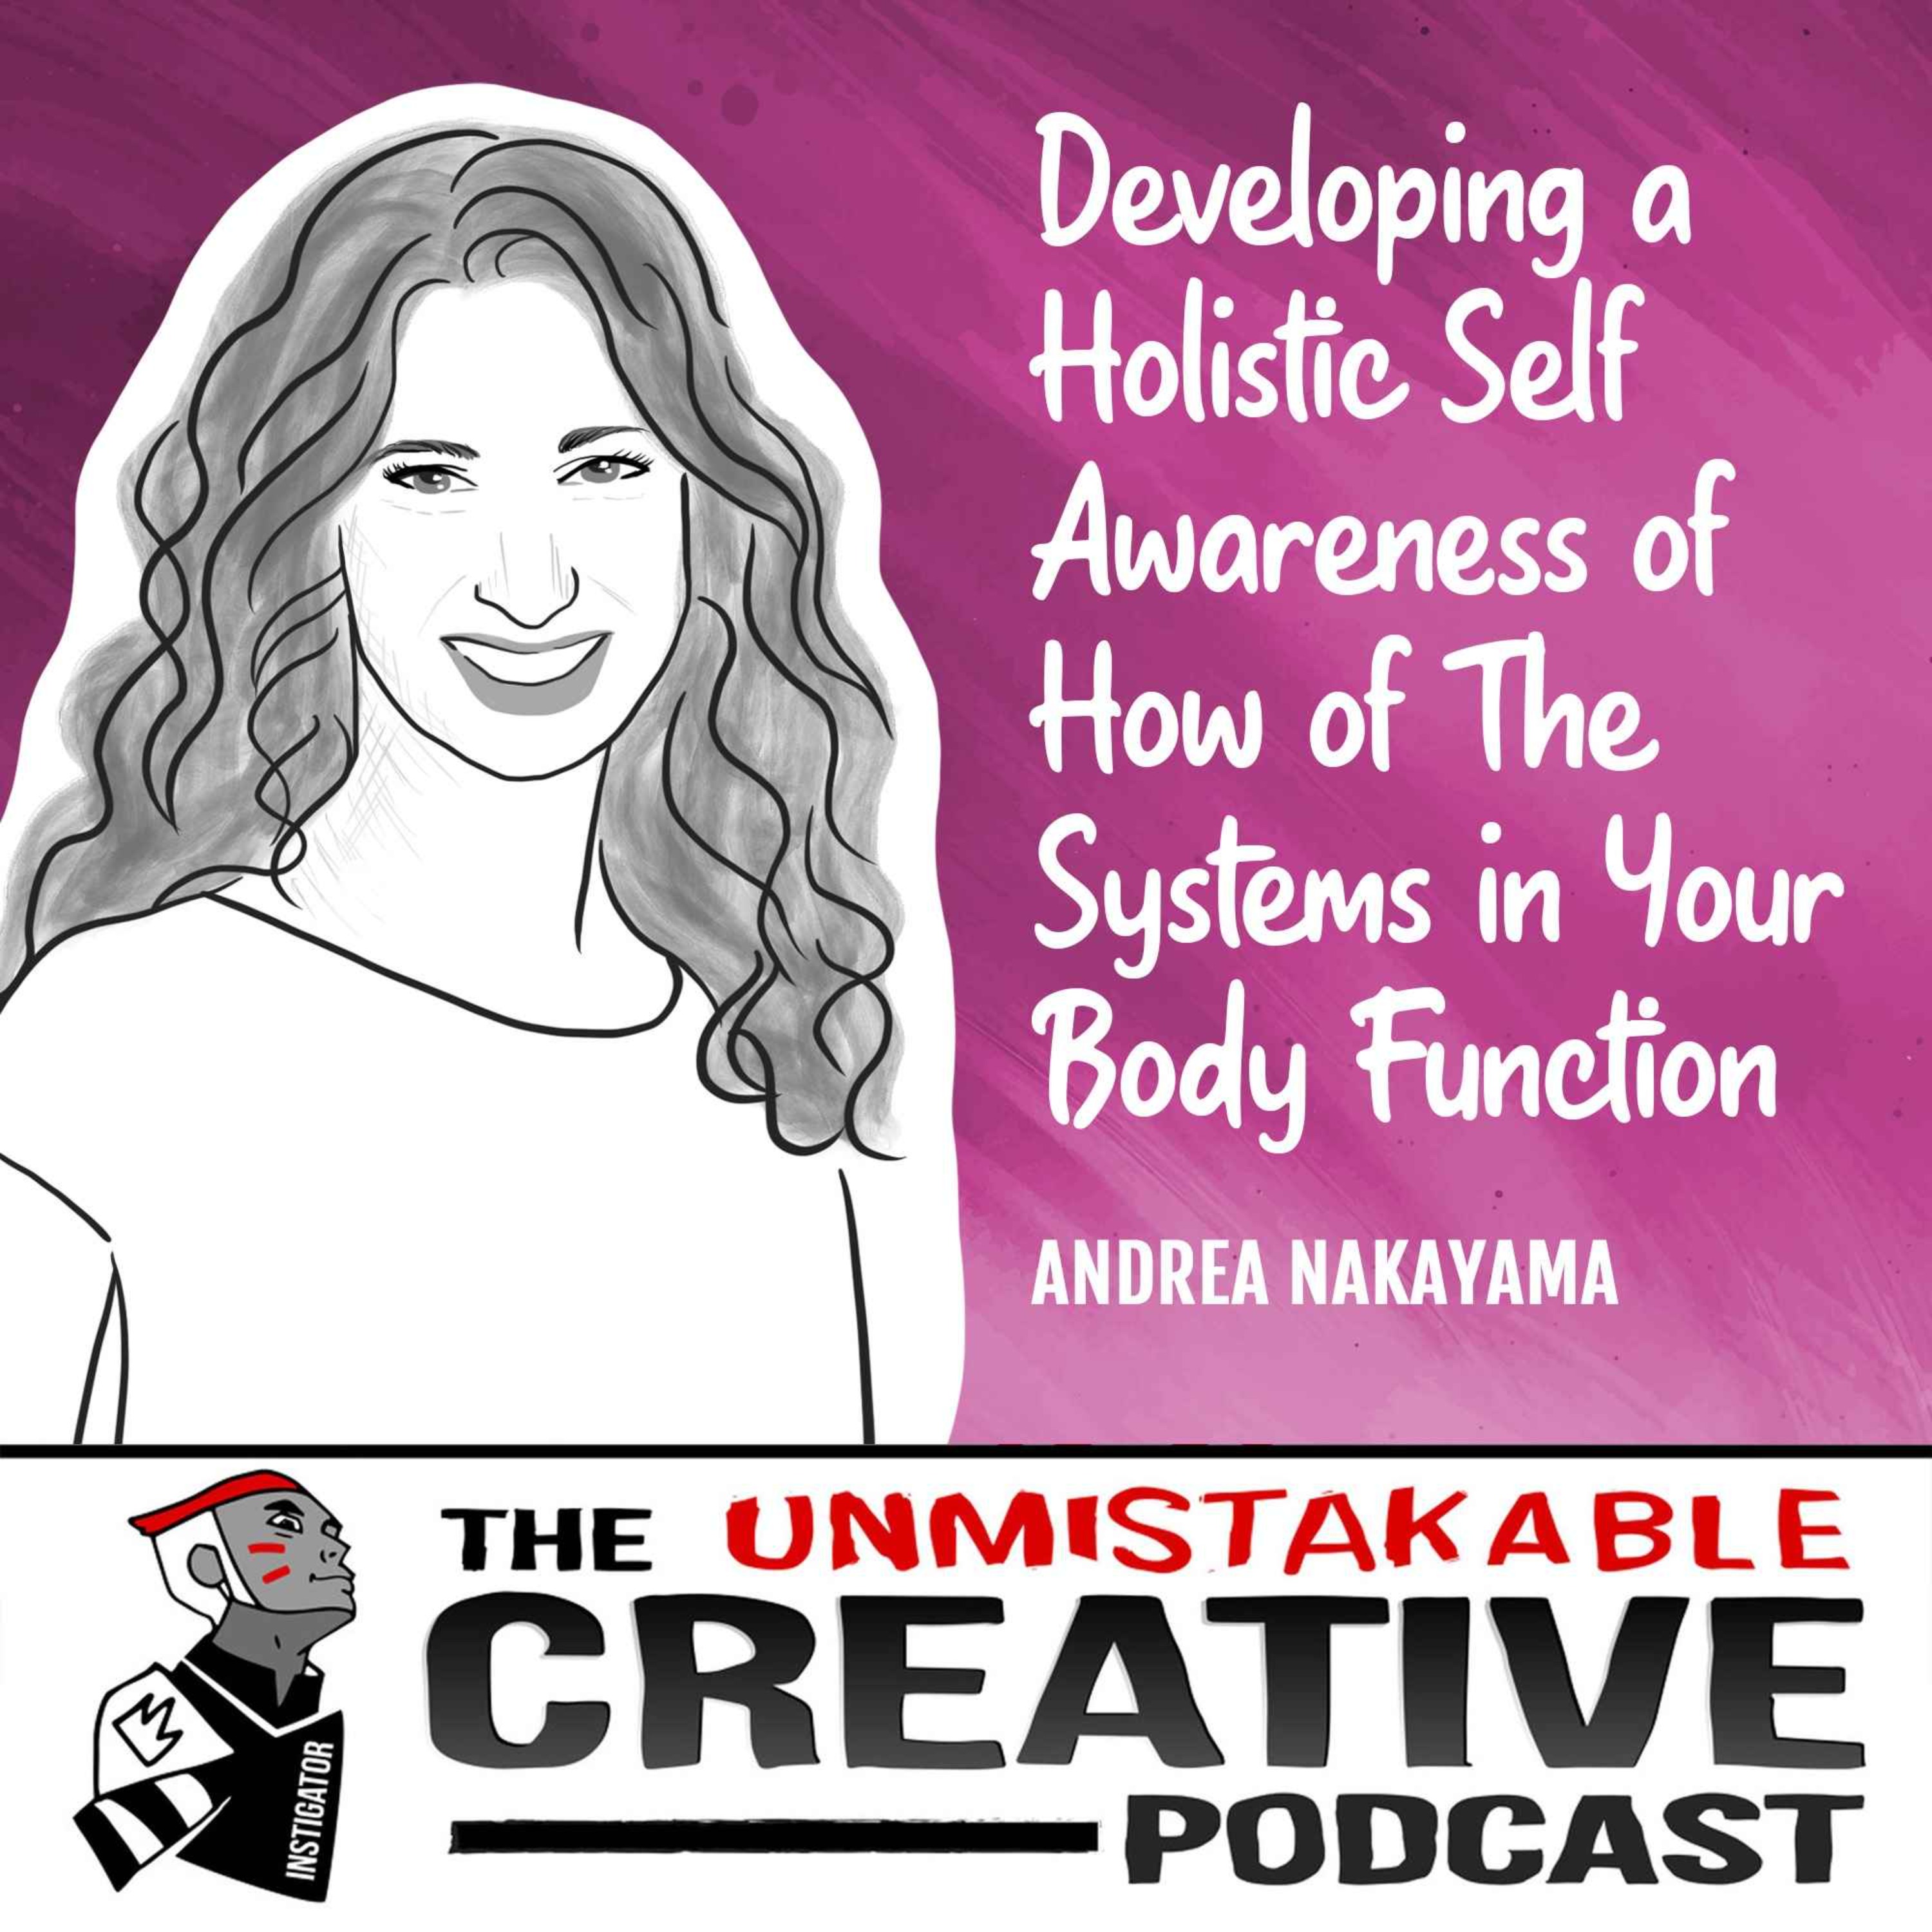 Andrea Nakayama | Developing a Holistic Self Awareness of How of The Systems in Your Body Function Image